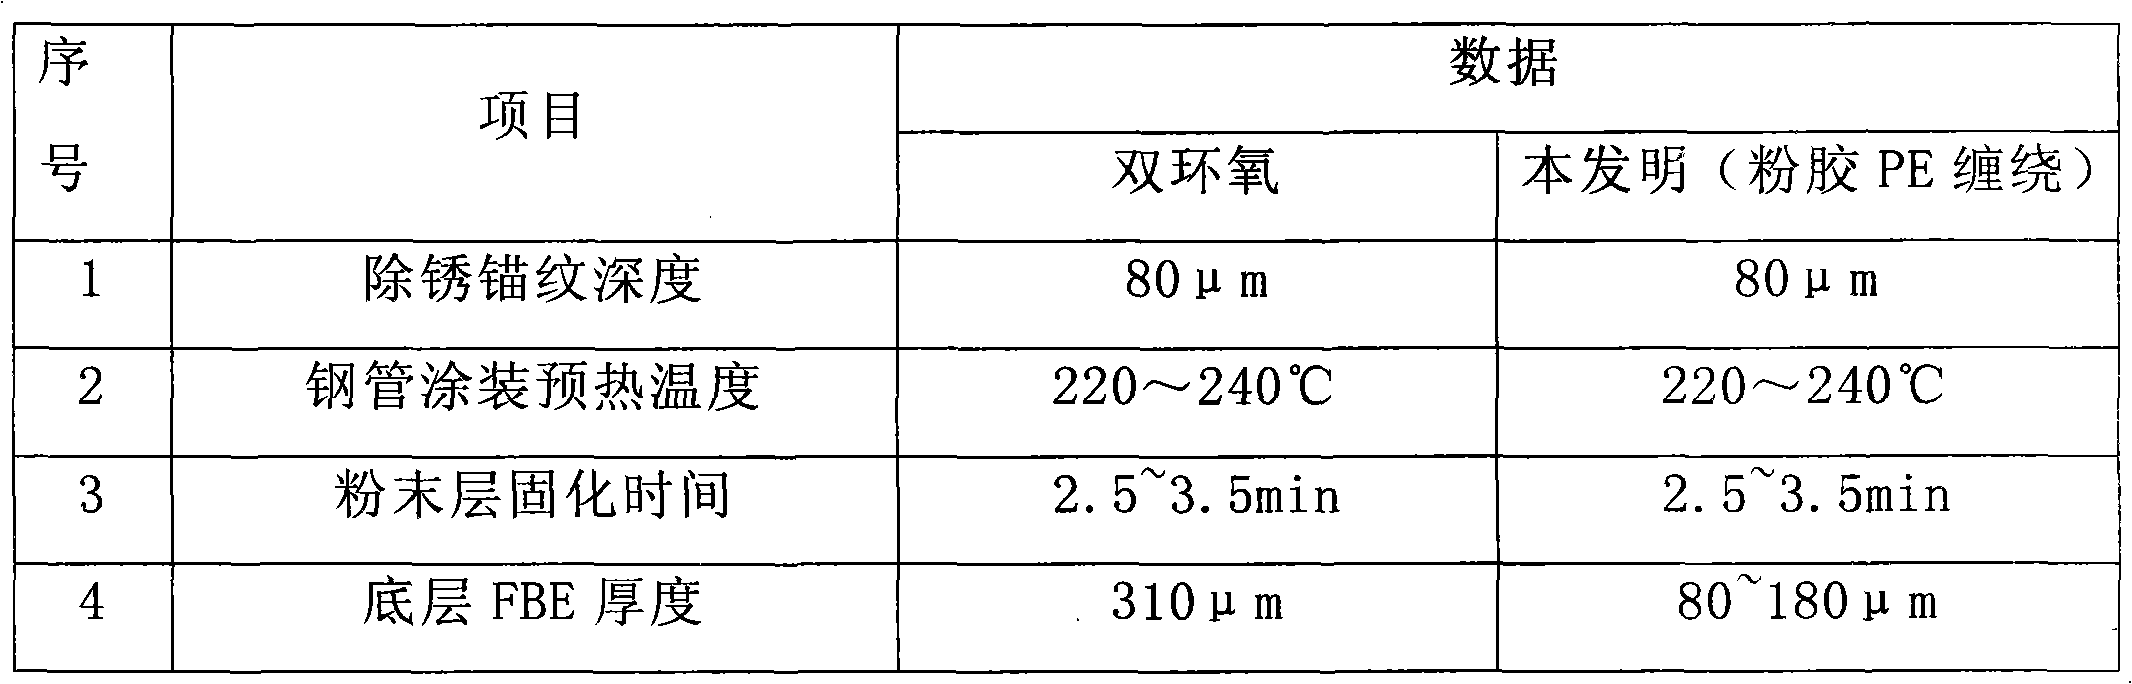 Coating process for pipeline three-layer structural anticorrosive coating